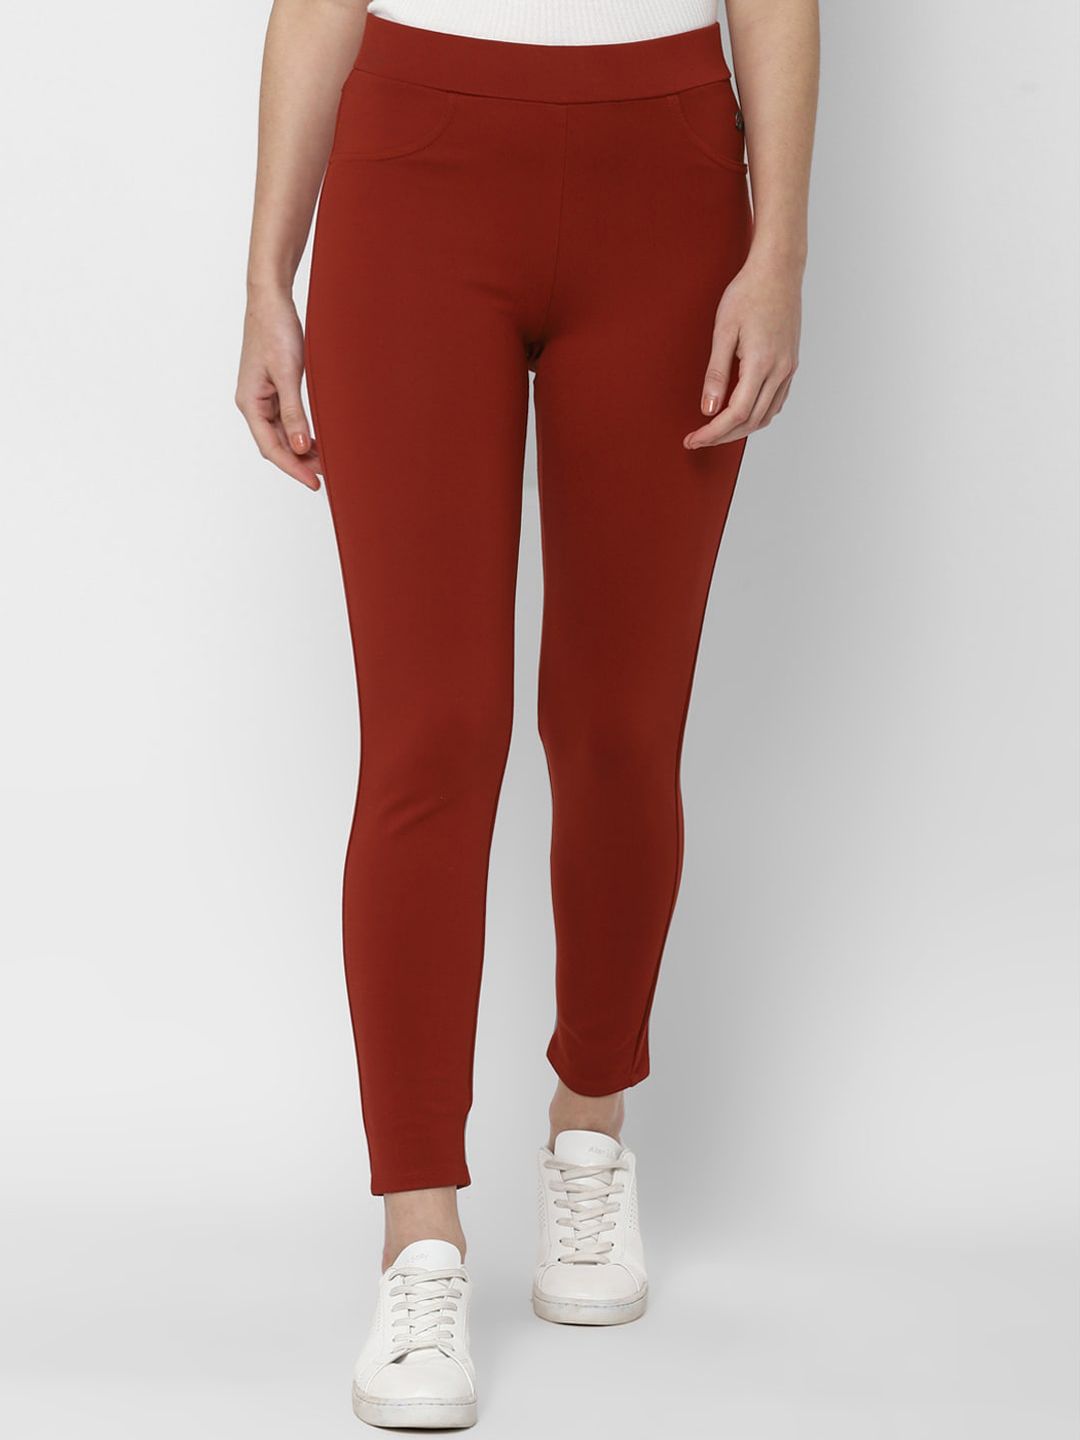 Allen Solly Woman Red Trousers Price in India